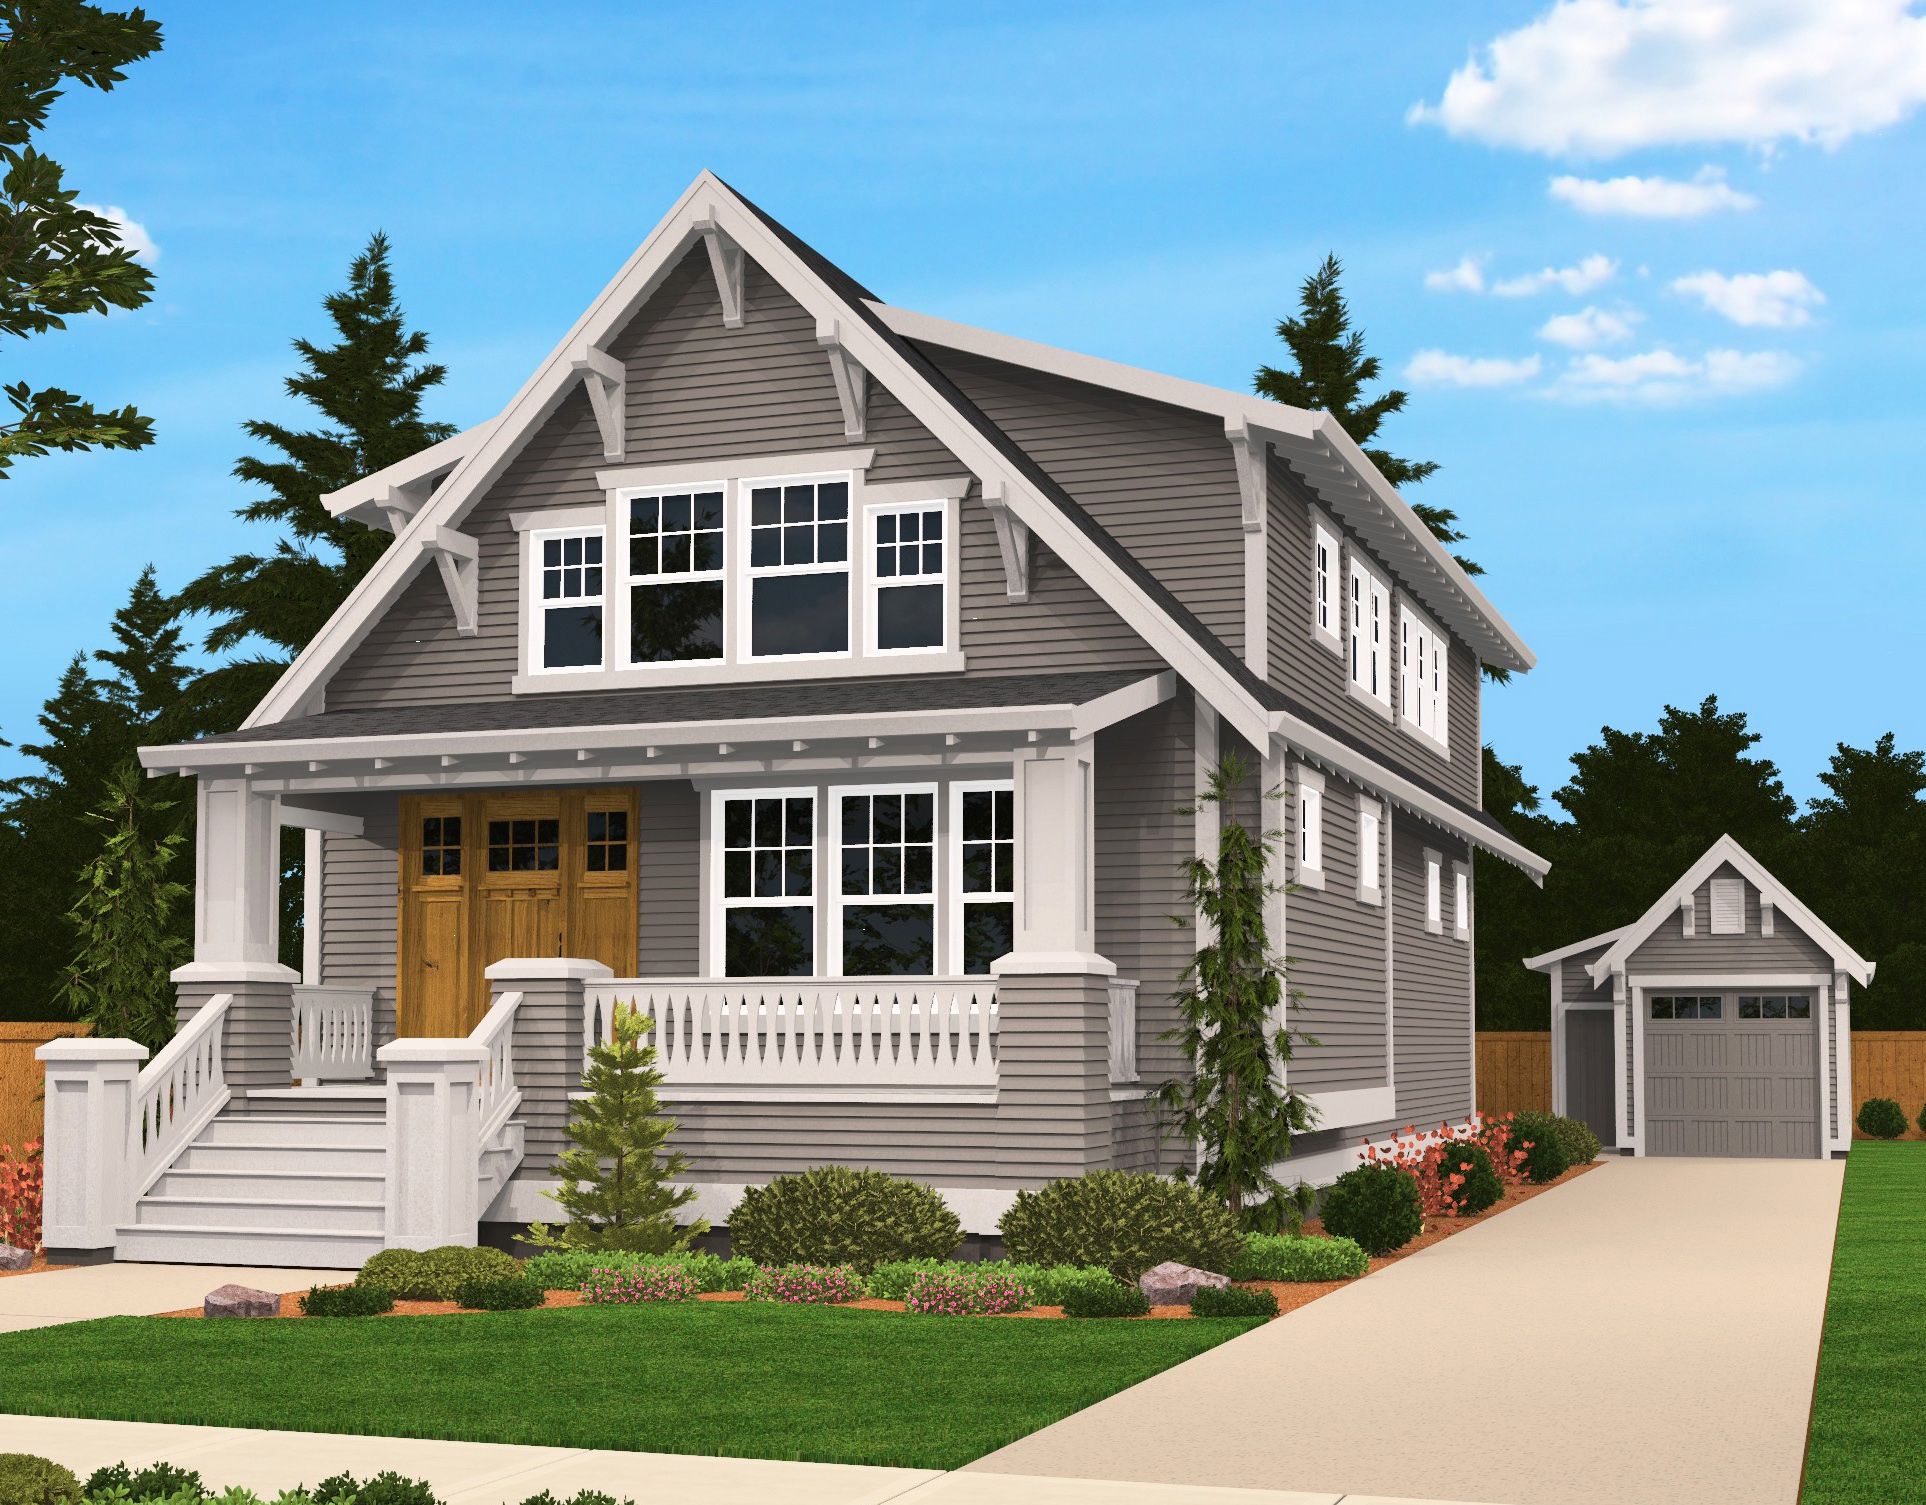 Plan 85058MS: Handsome Bungalow House Plan | Bungalow, Lofts and Pdf